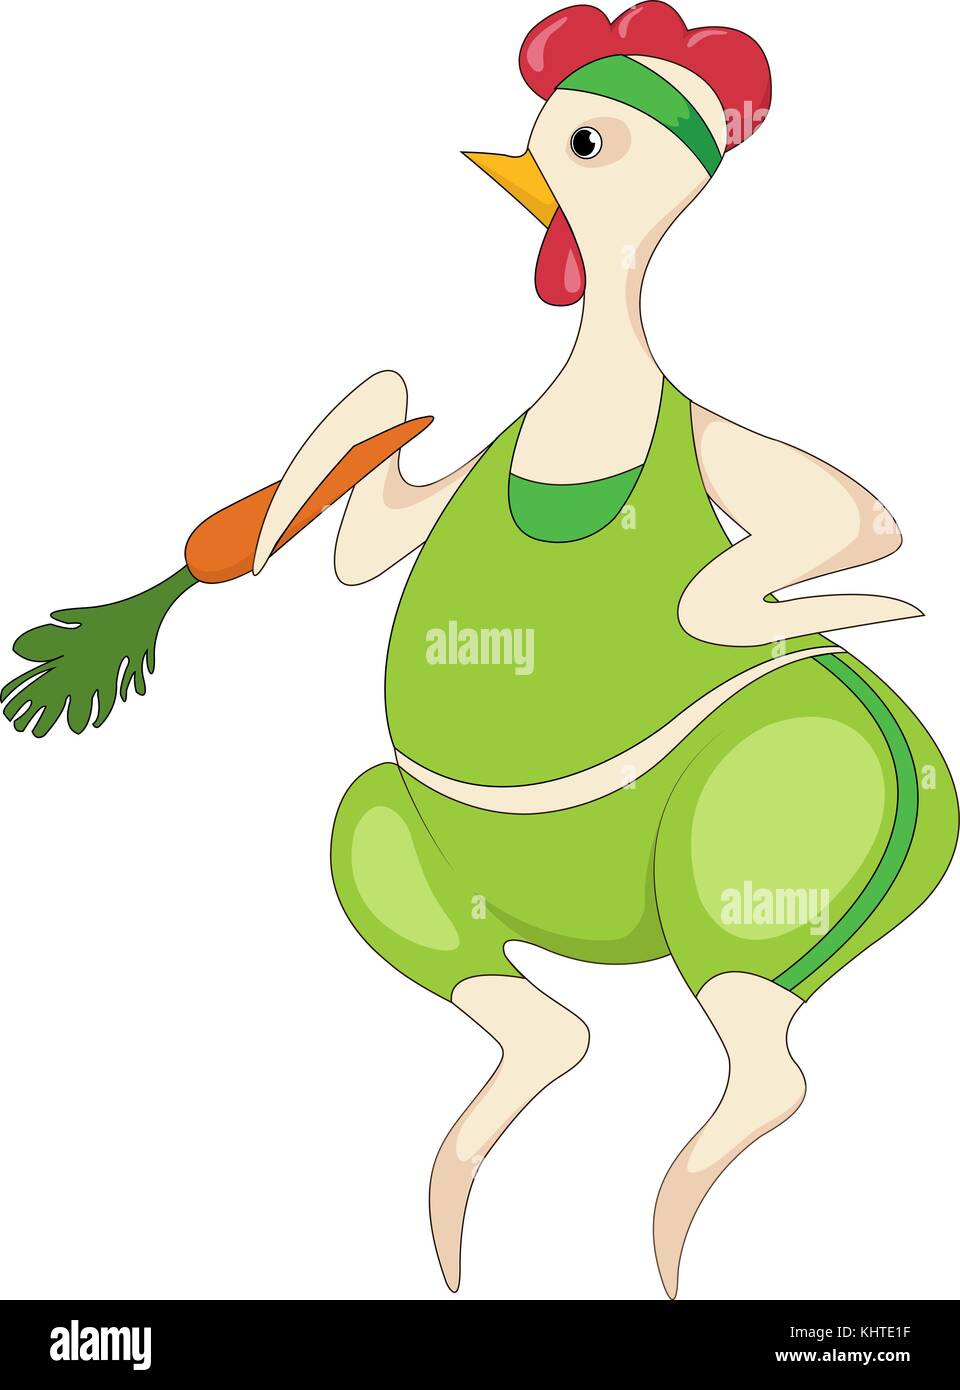 A funny hen in a workout outfit with a carrot, a cartoon character. An active and healthy lifestyle concept. Stock Vector